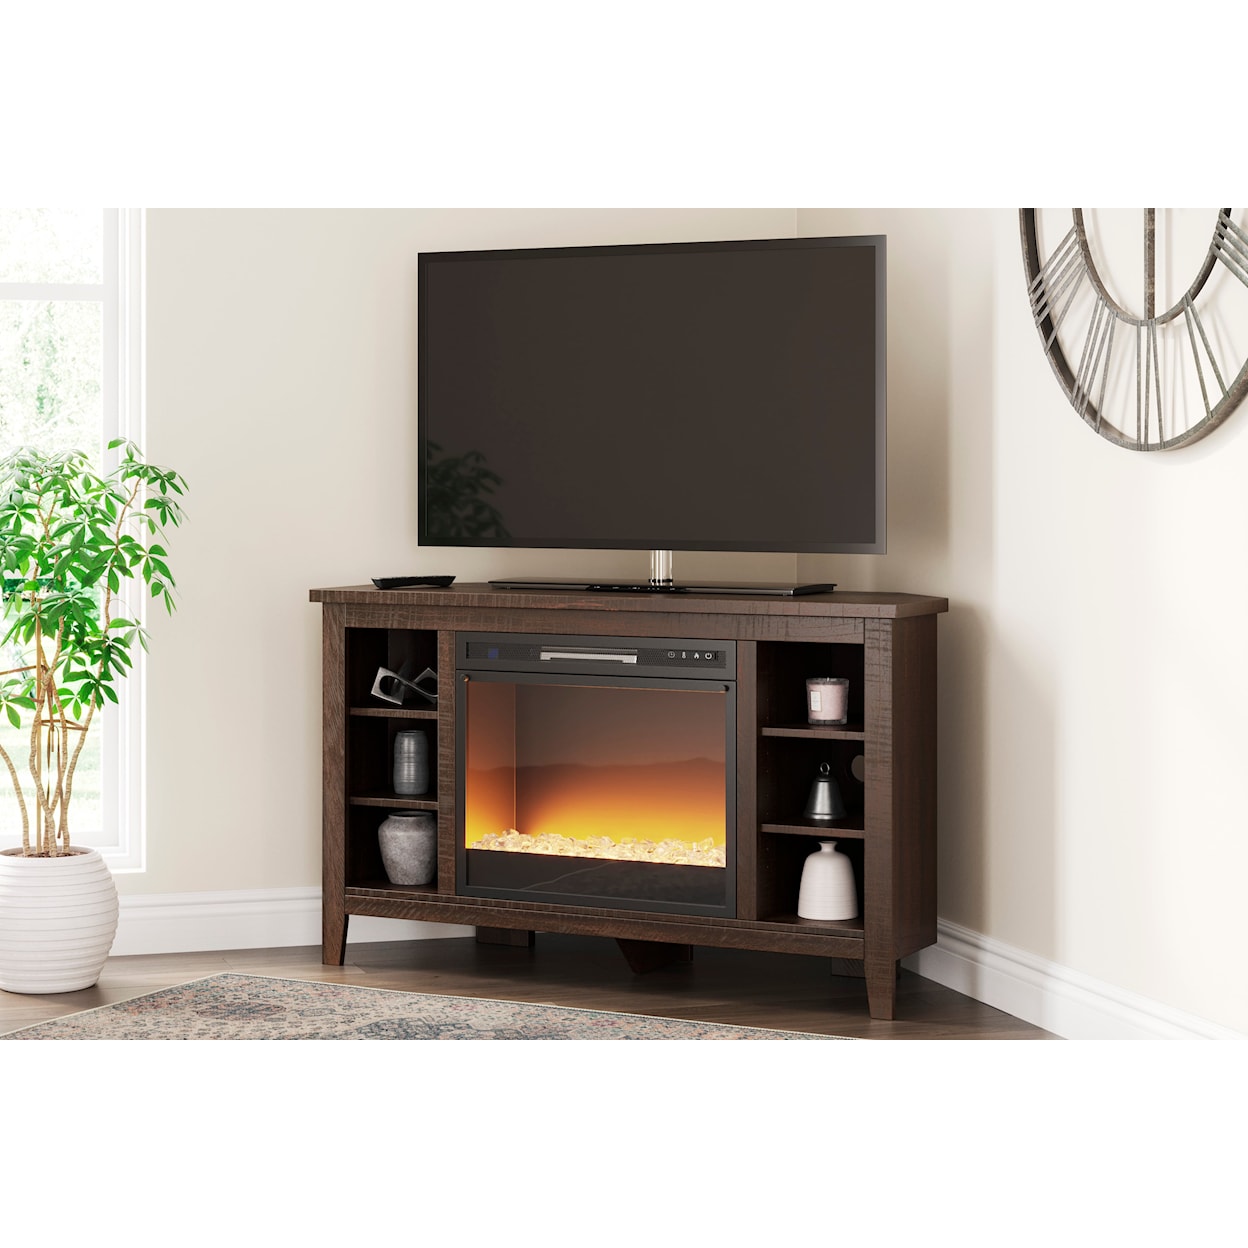 Benchcraft Camiburg Corner TV Stand with Electric Fireplace